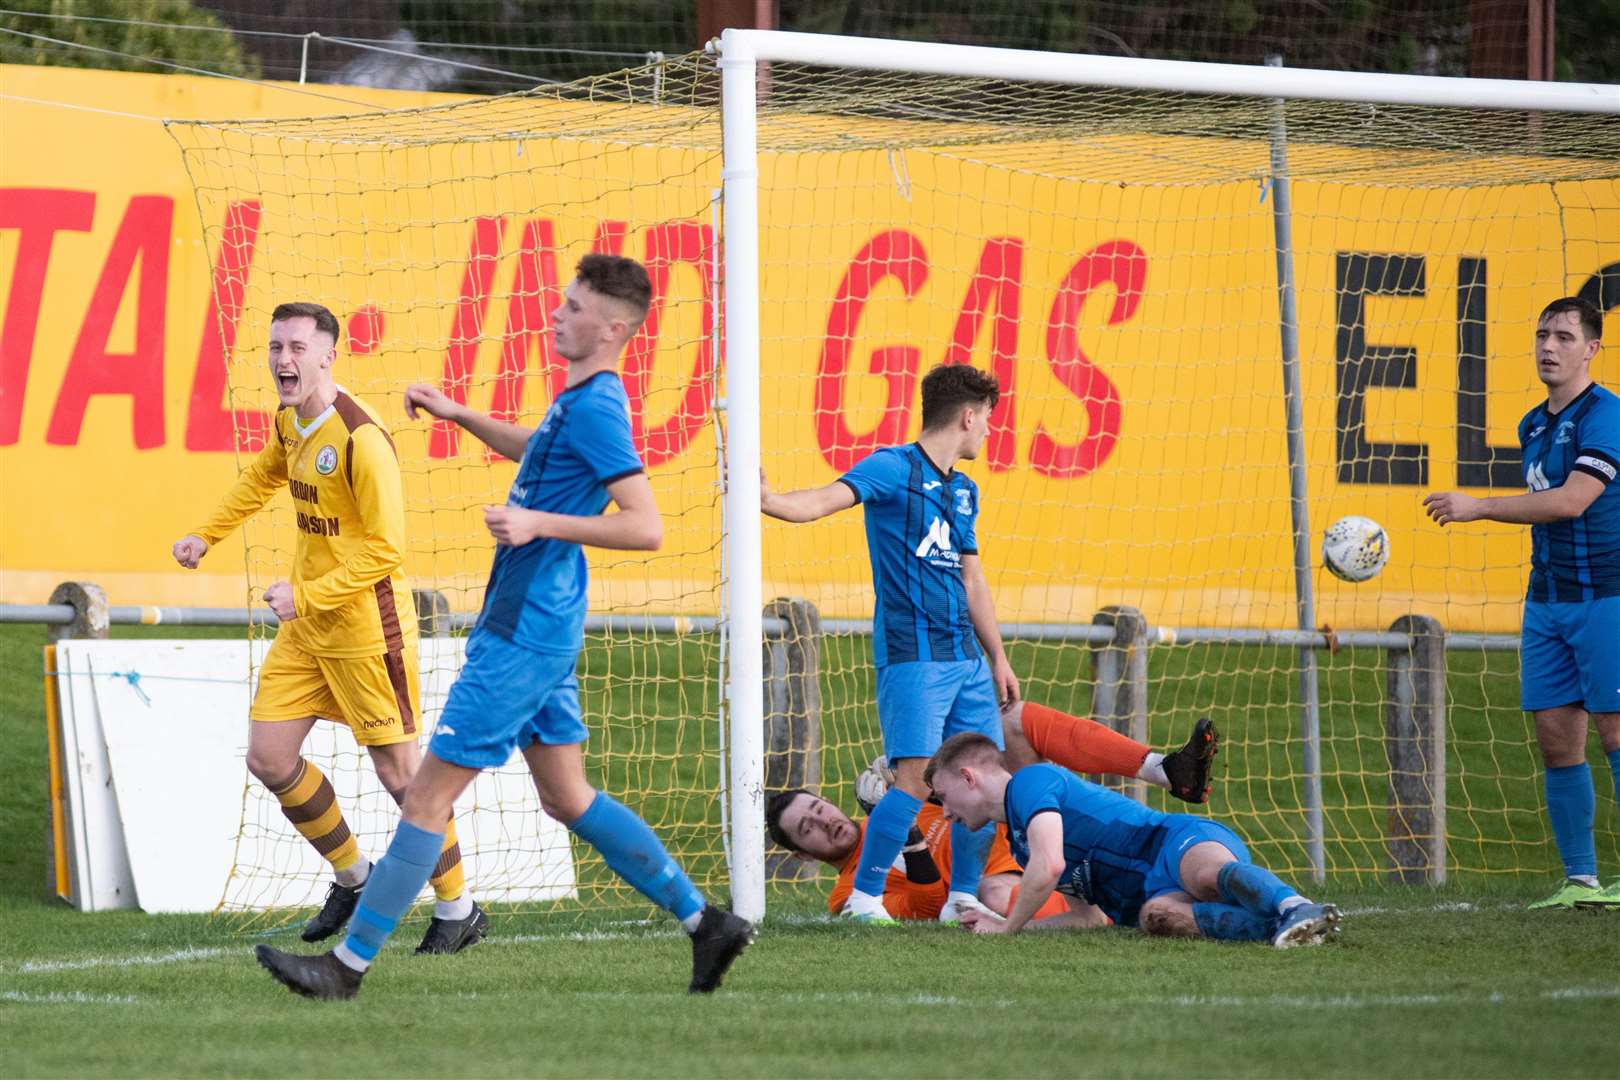 Forres Mechanics' Dale Wood wheels away to celebrate his first half goal against the Strathy Jags. ..Forres Mechanics FC (8) vs Strathspey Thistle FC (1) - Highland Football League 22/23 - Mosset Park, Forres 07/01/23...Picture: Daniel Forsyth..